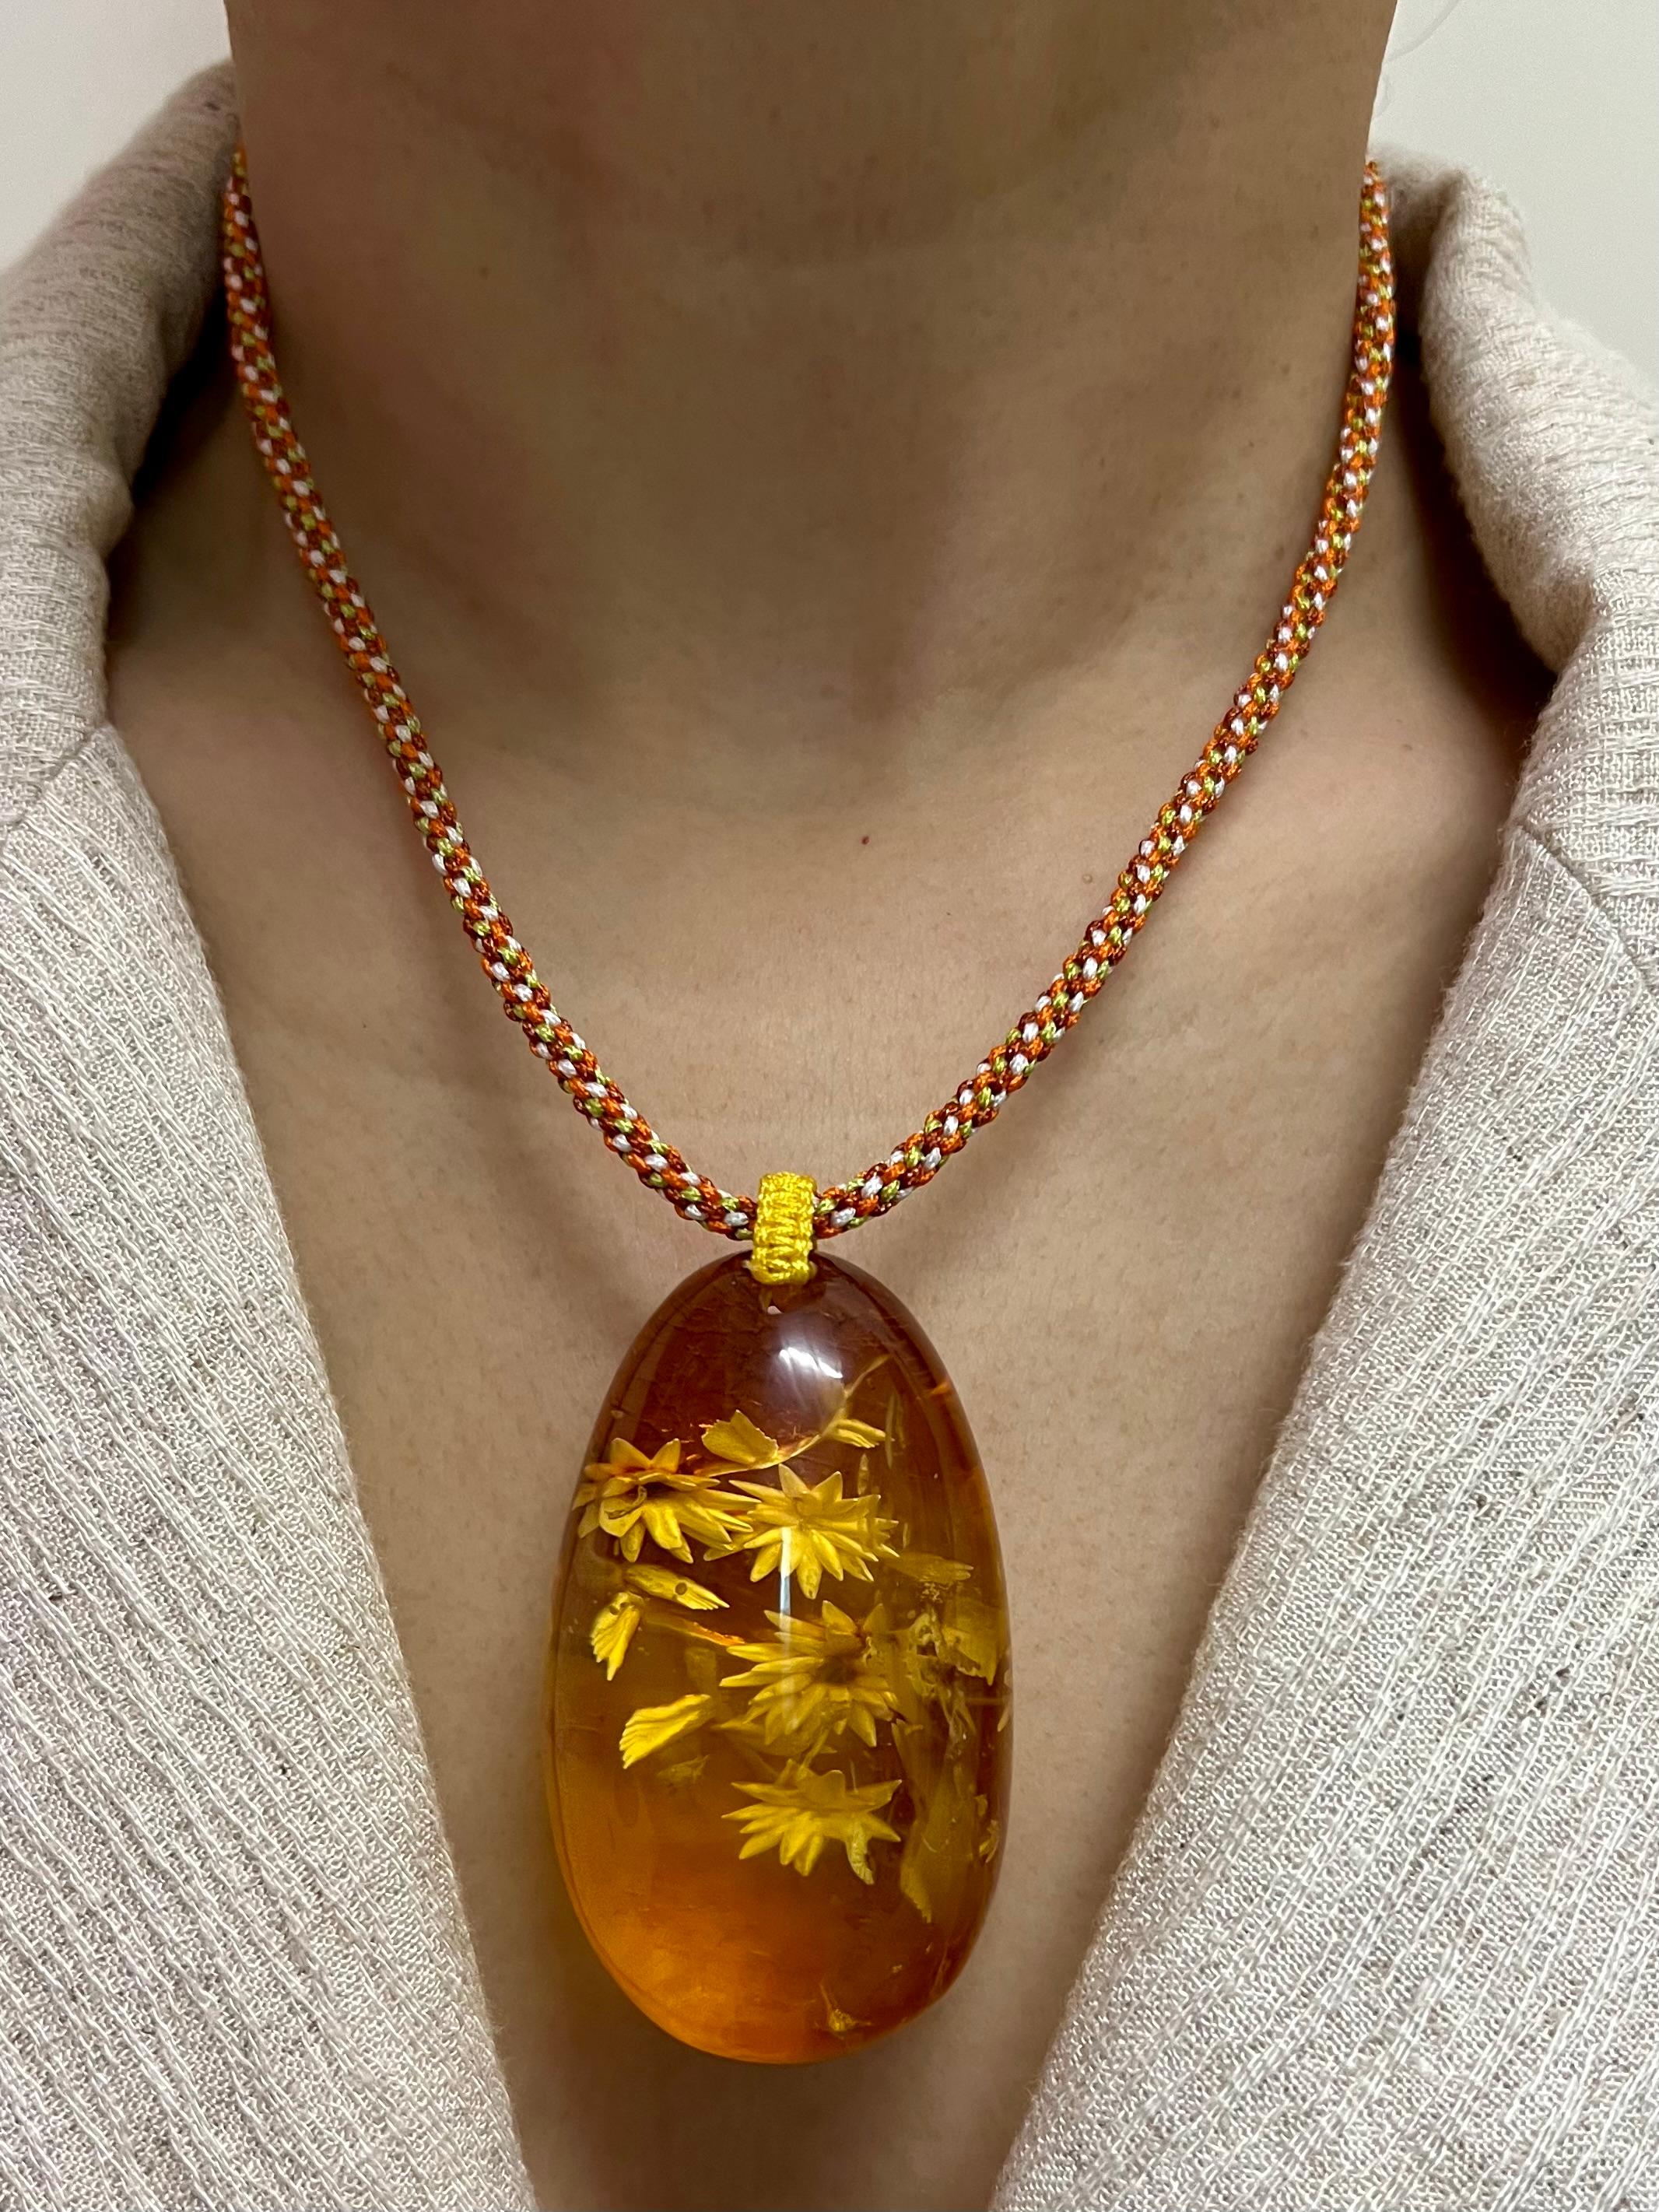 Please check out the HD video. This is a statement piece! Here is a super nice, large piece of certified natural Amber (187.18 cts). The key is that it is certified natural! A large percentage of Ambers for sale in the market are man made and not